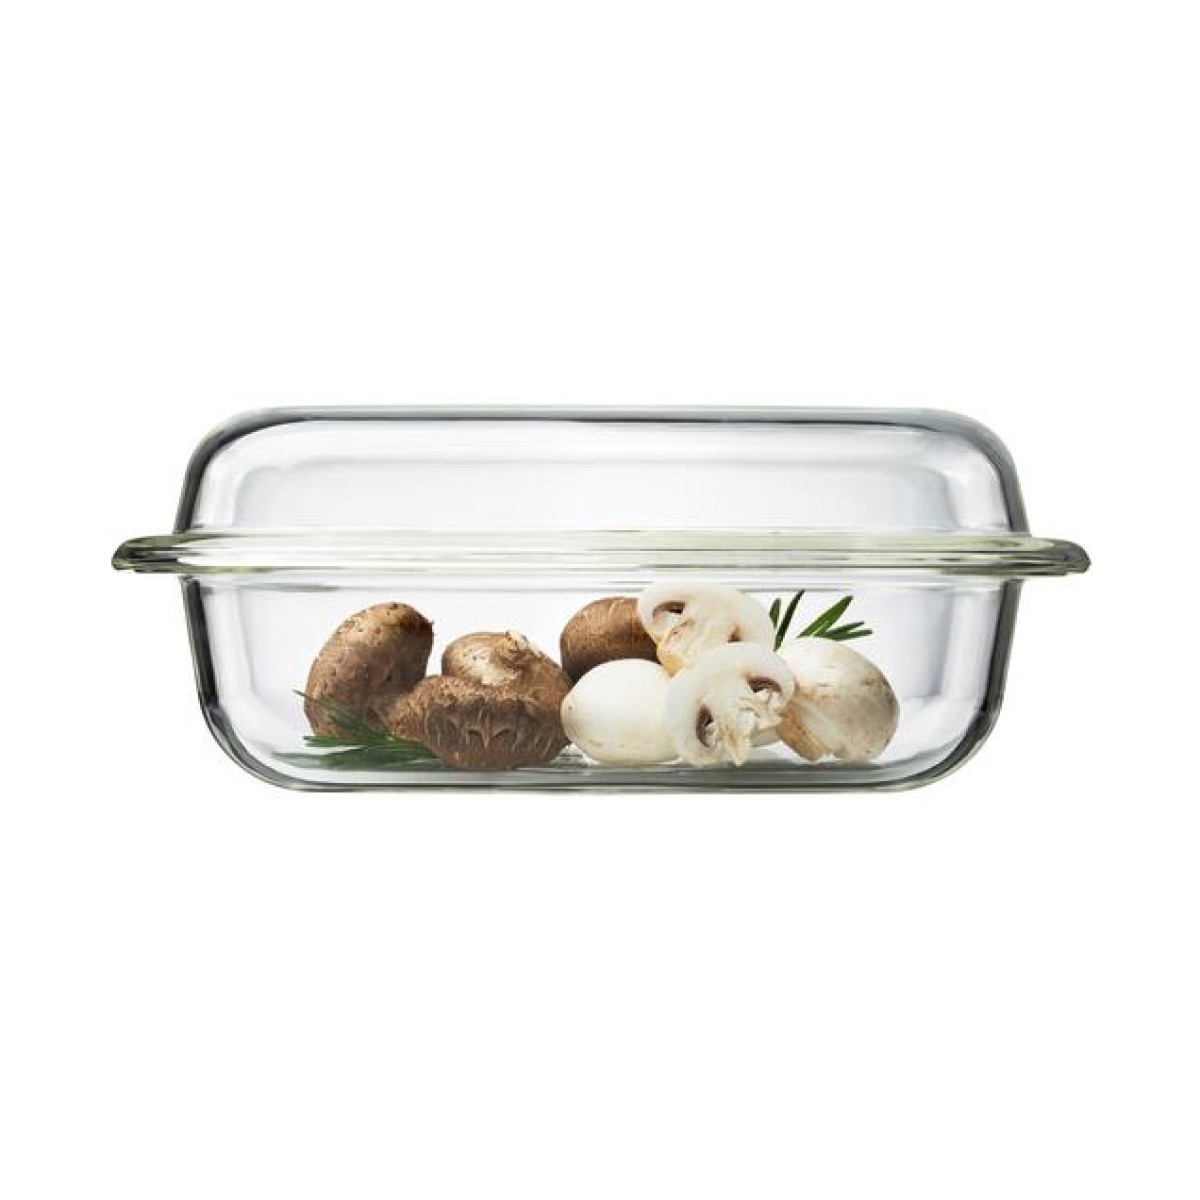 Lock&Lock and Dreamfarm products, Heat resistant glass container 160 ml